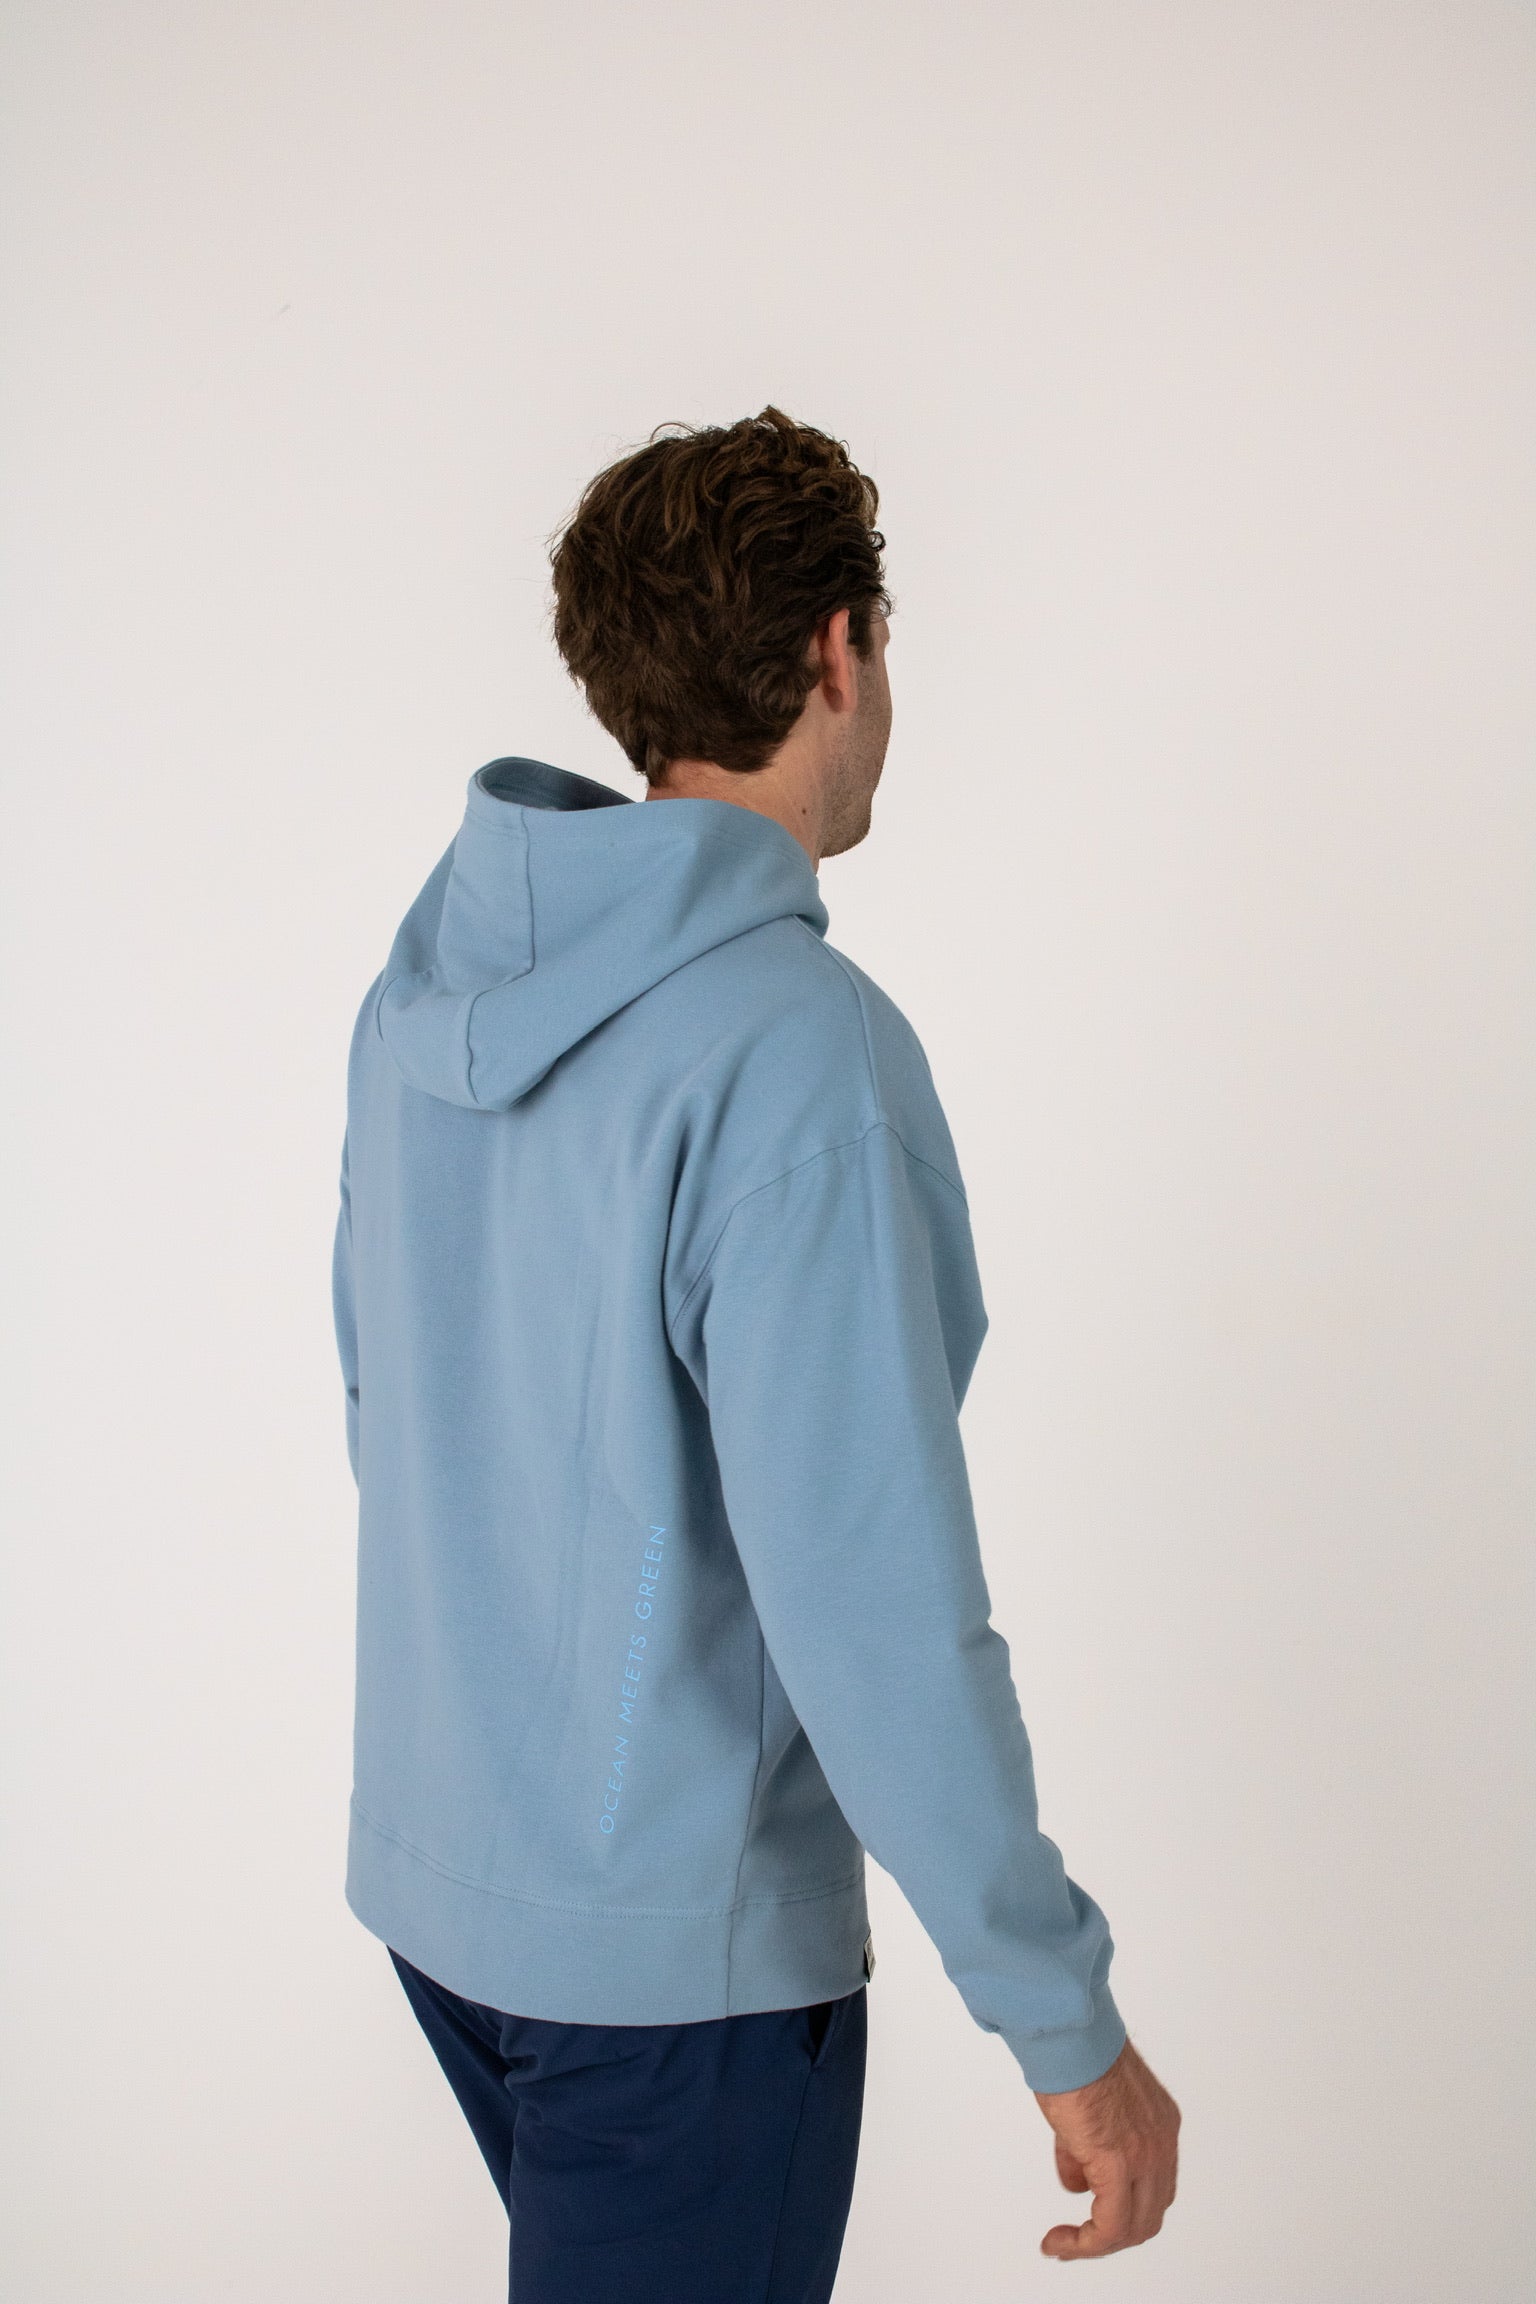 Full body image of Ocean Meets Green men's golf hoodie Wave in ice, showing the logo